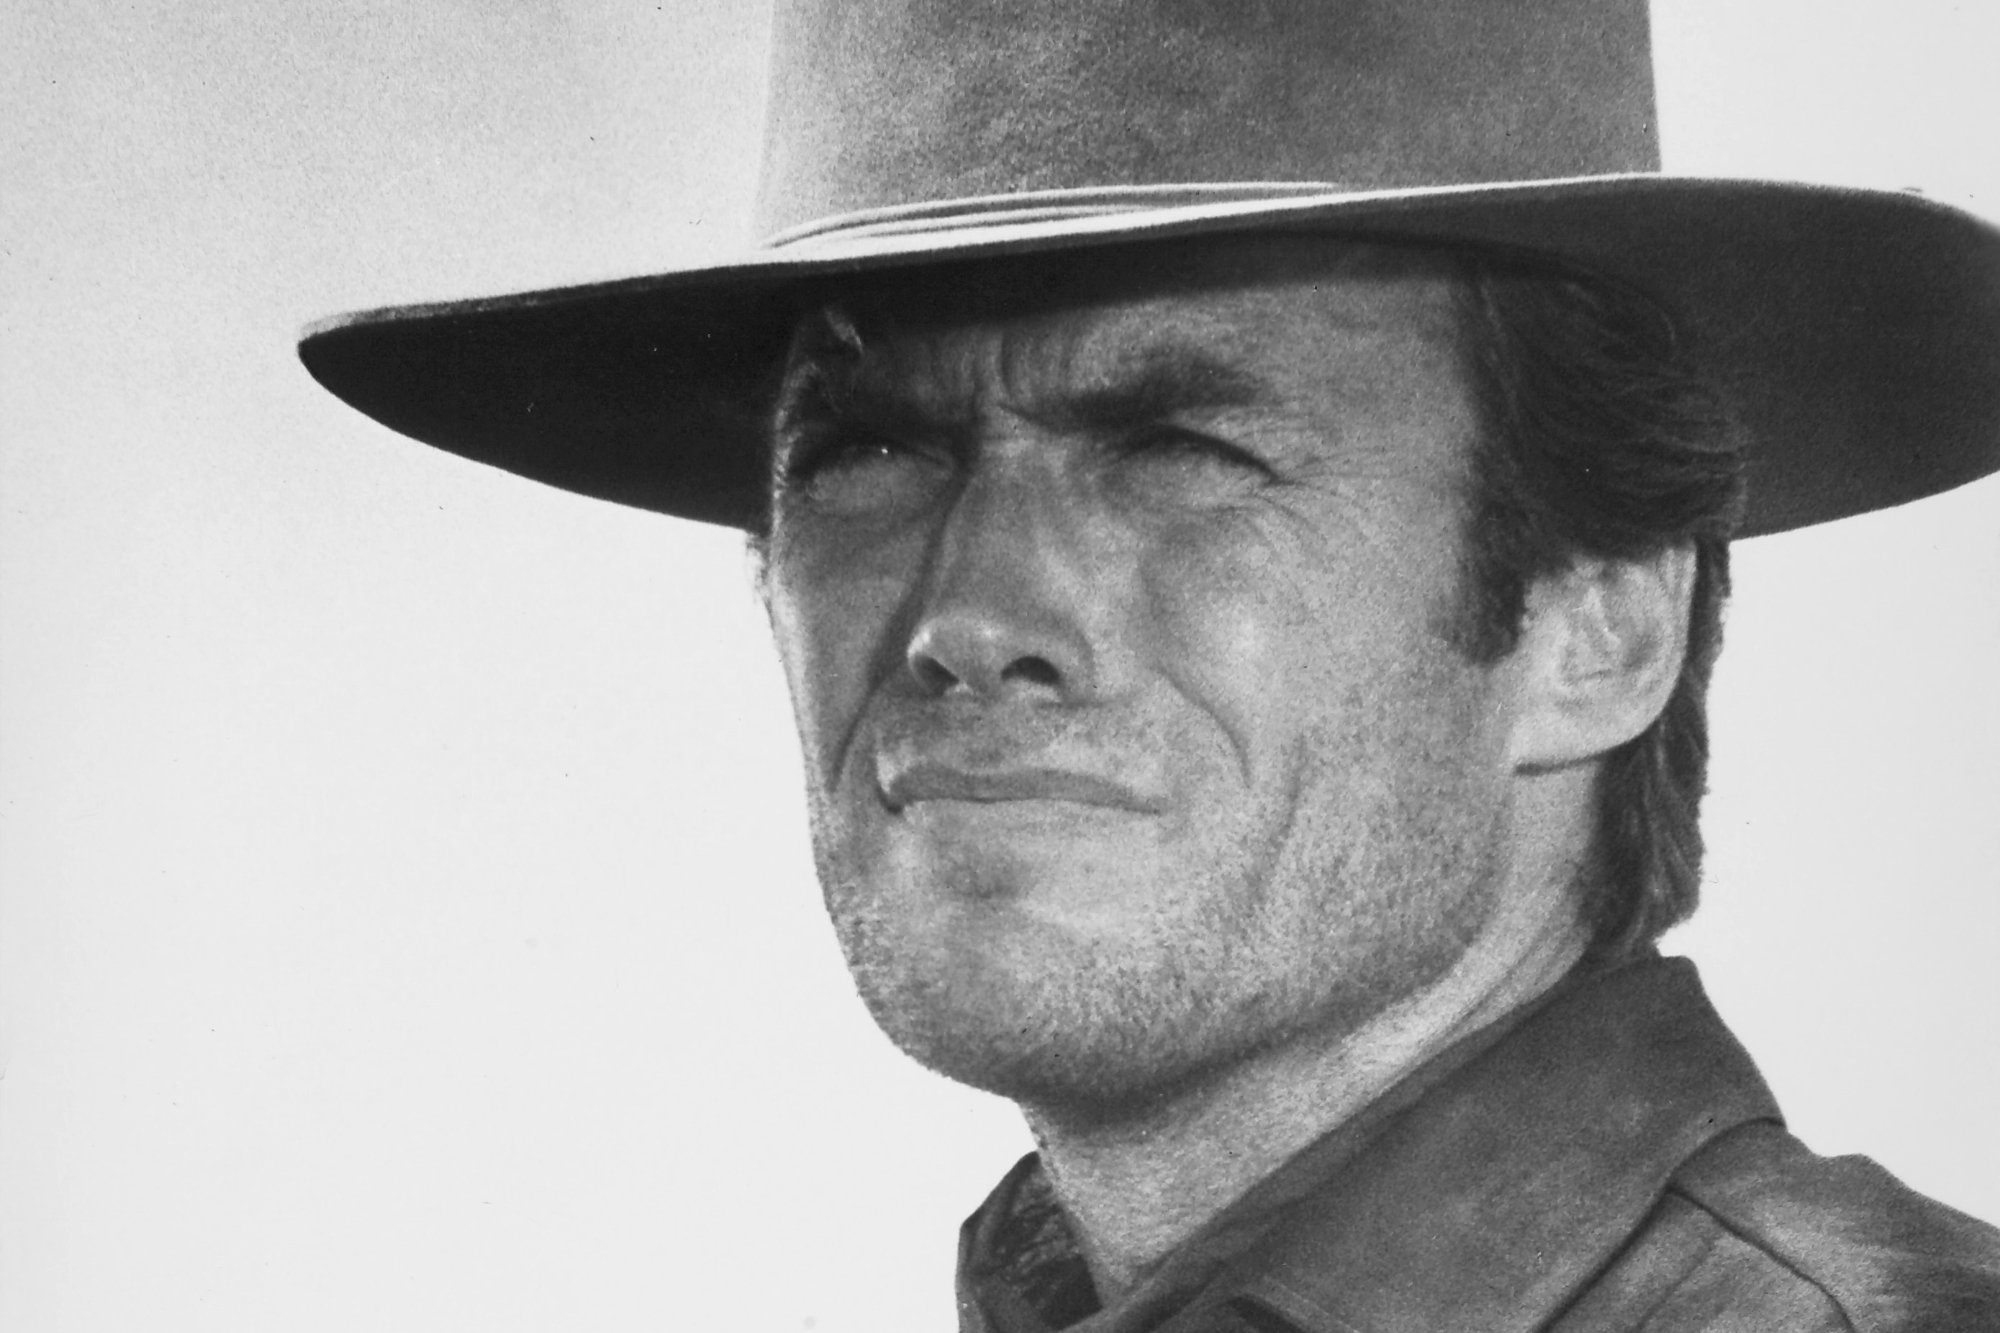 Clint Eastwood as Marshal Jed Cooper in the movie 'Hang 'Em High.' The black-and-white picture shows Eastwood squinting wearing a cowboy hat and a collared sheriff shirt.